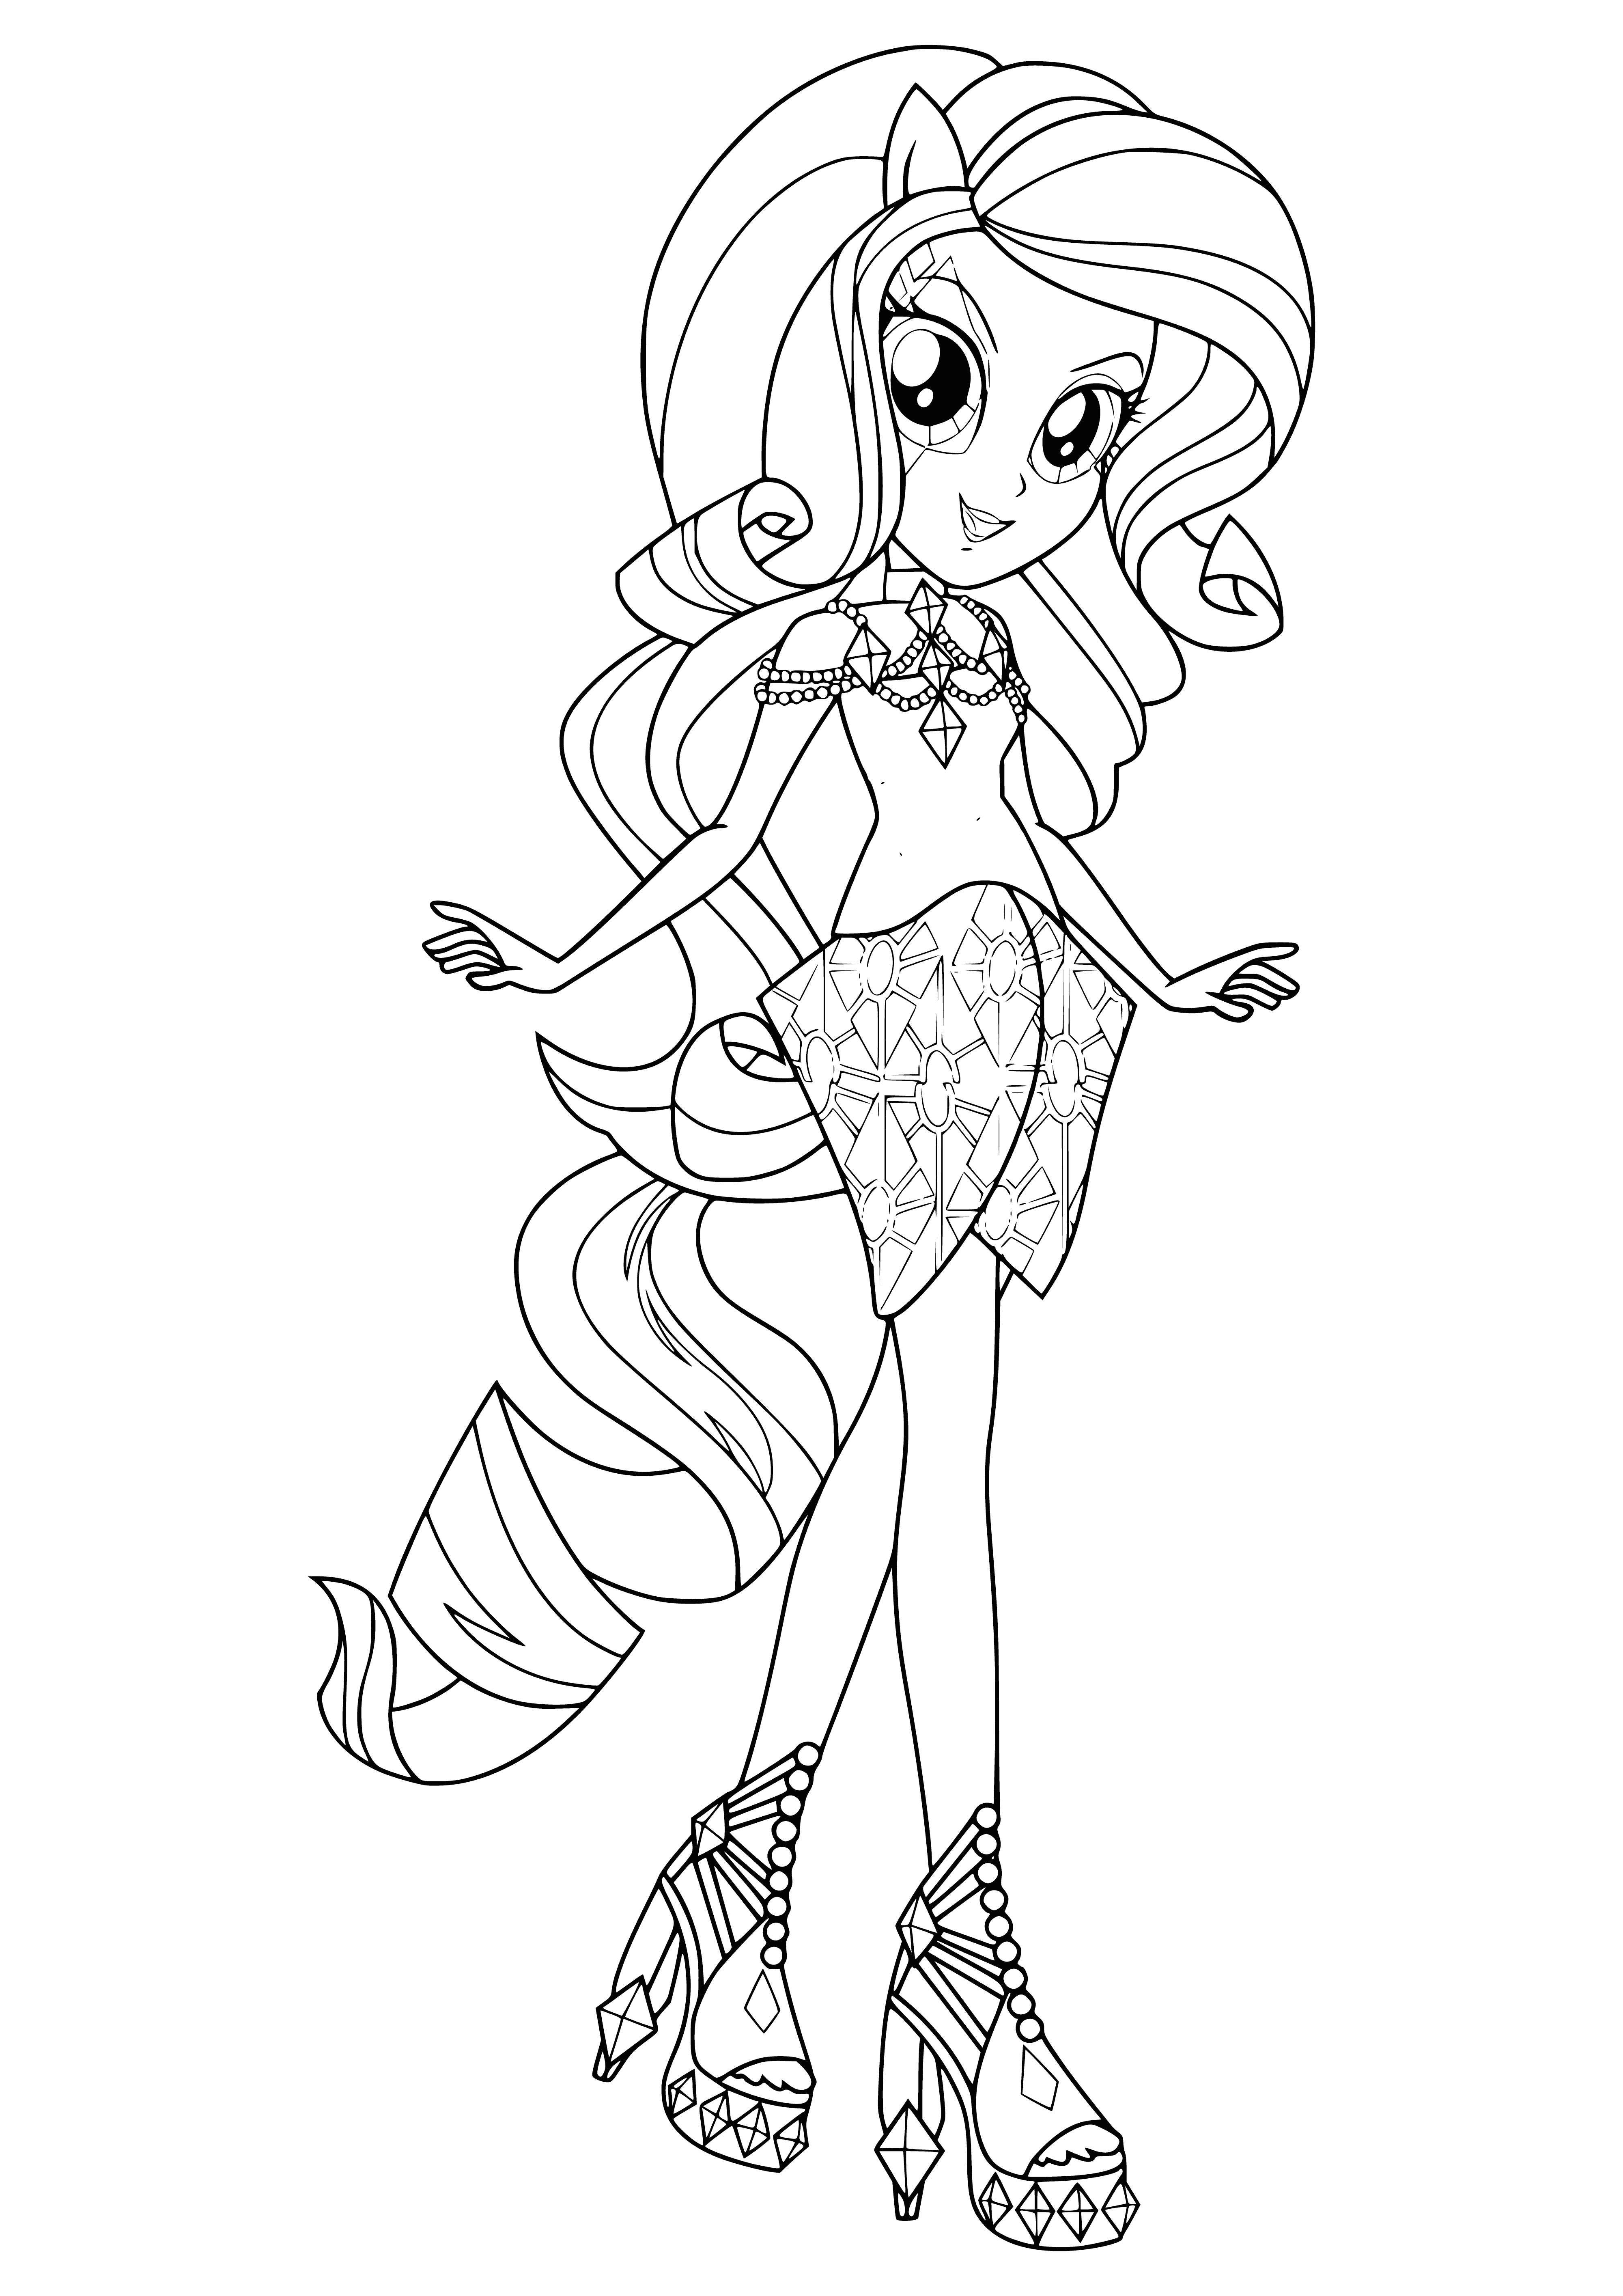 coloring page: Rarity is a stylish unicorn with blue eyes and long, blue hair wearing a lavender and white outfit and a silver tiara. Carrying a mic, ready to perform!